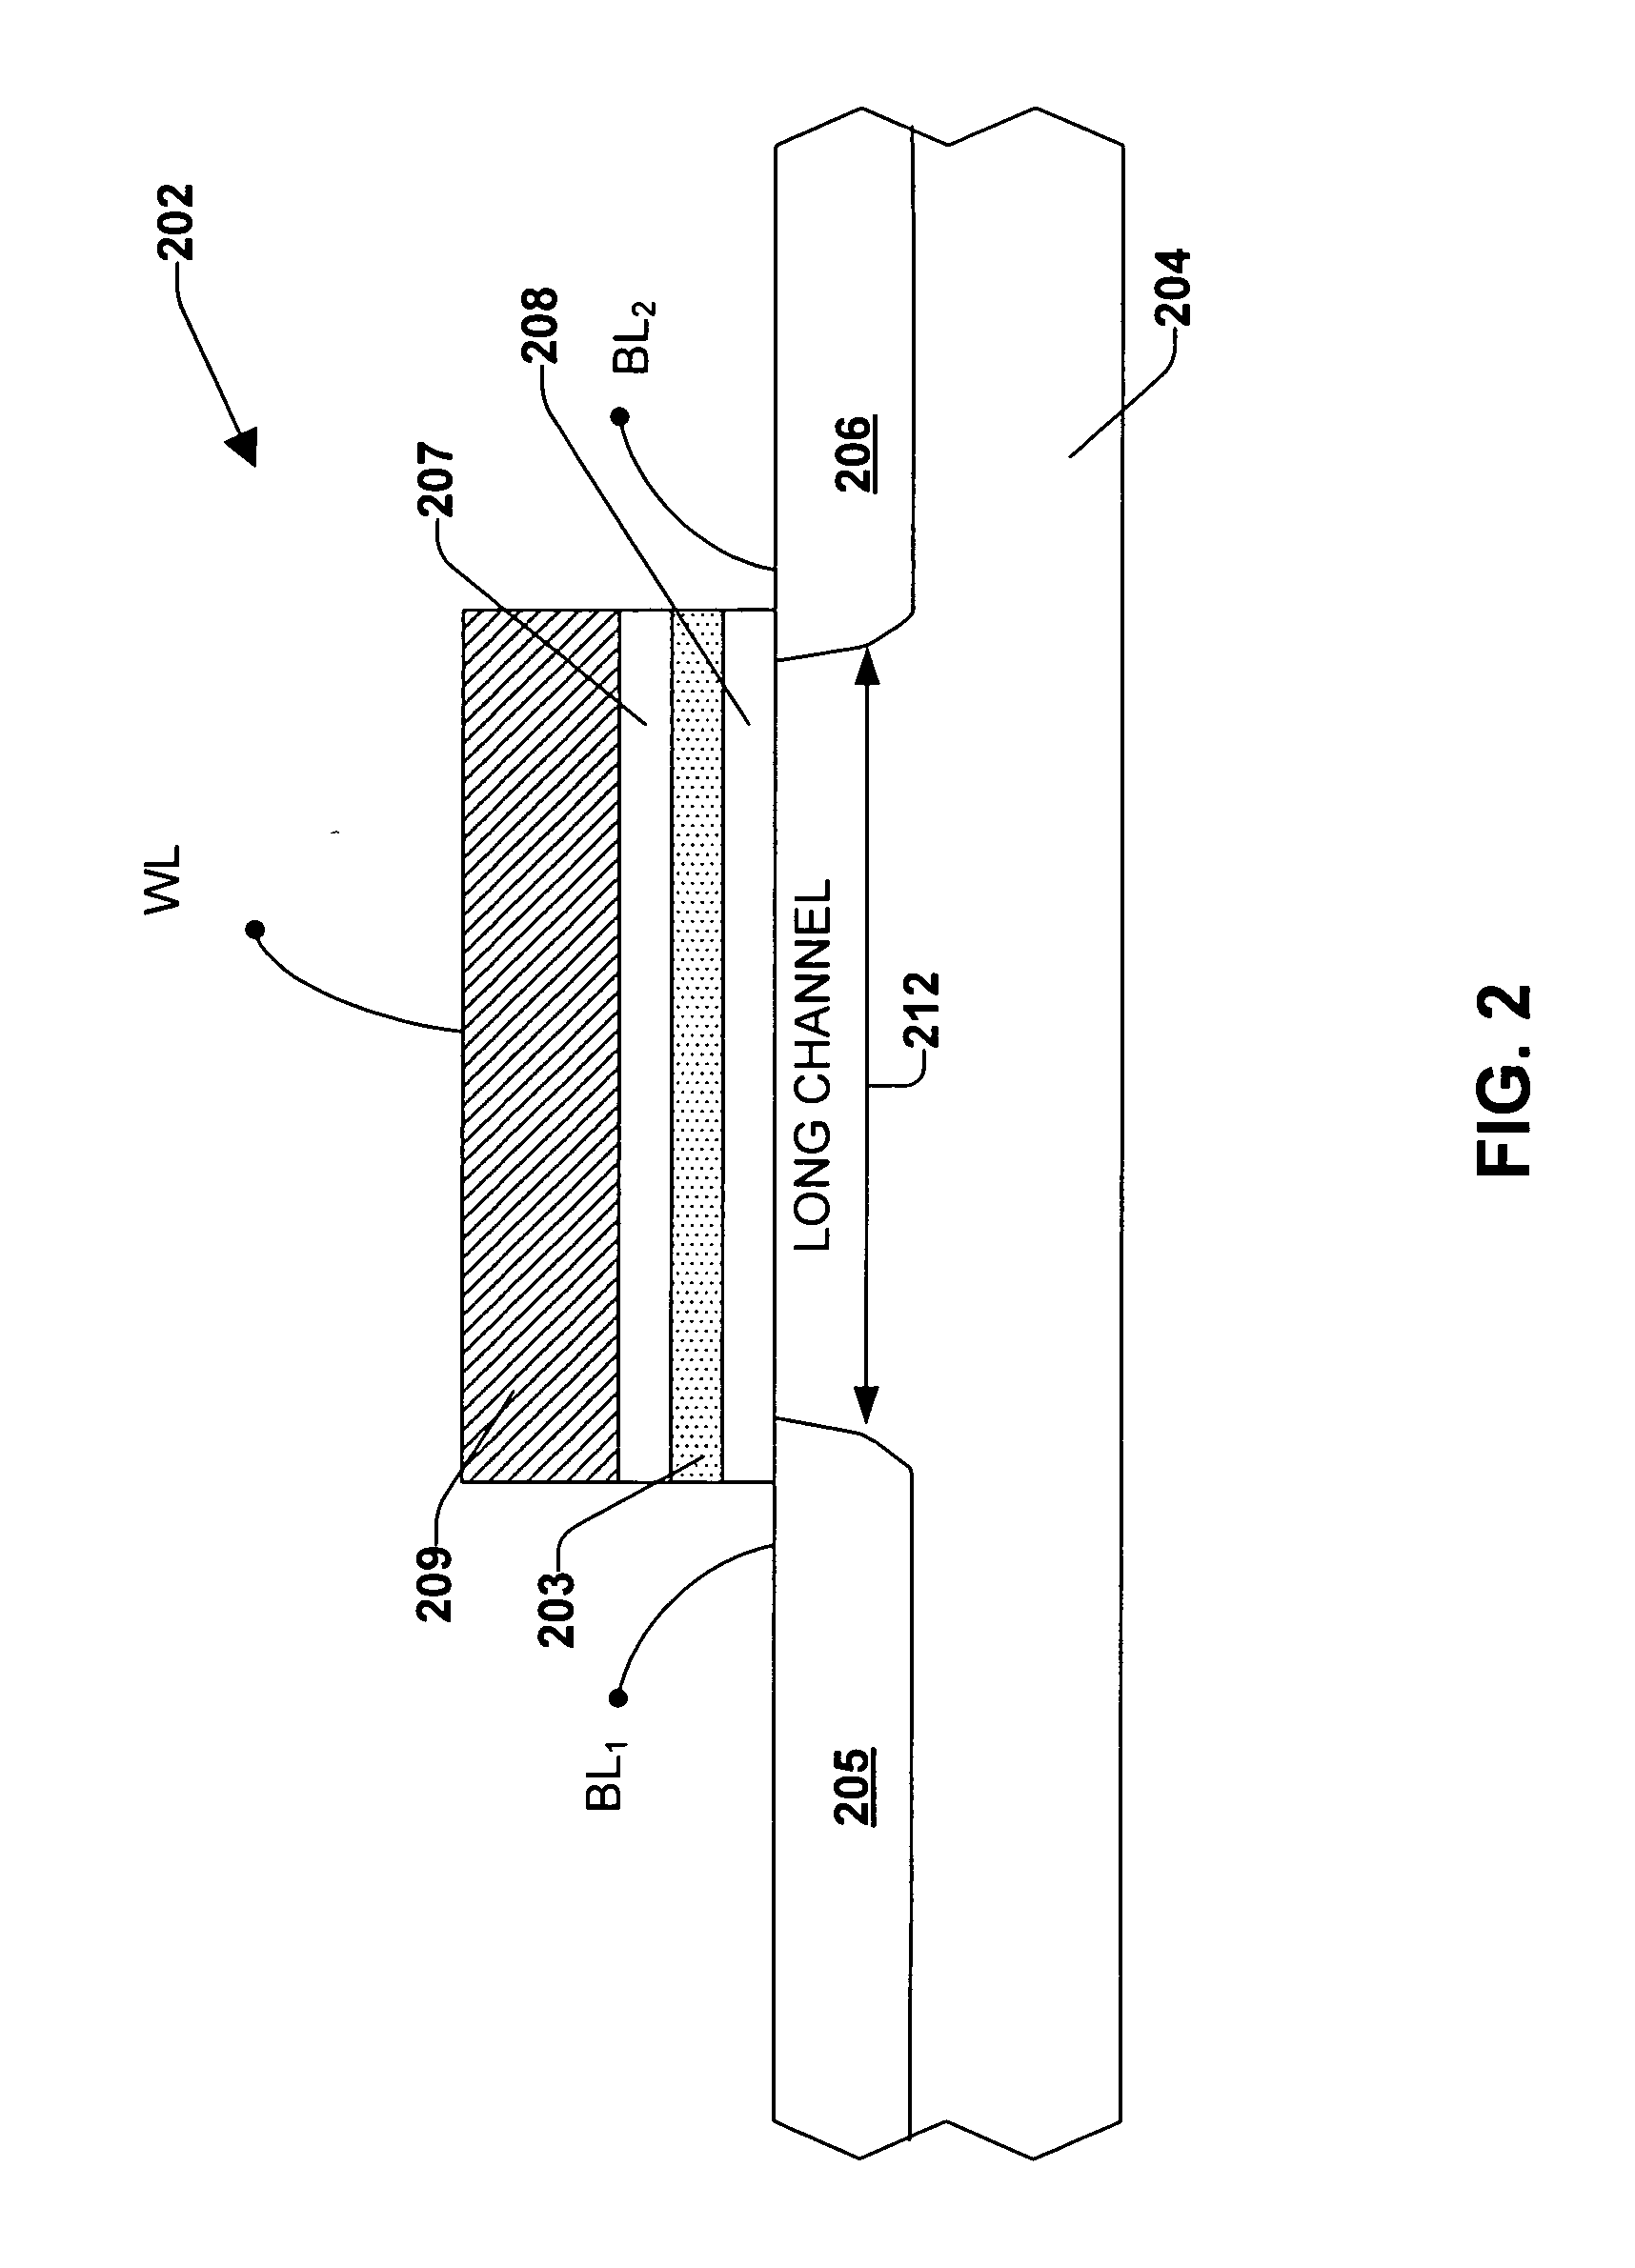 Ramp source hot-hole programming for trap based non-volatile memory devices